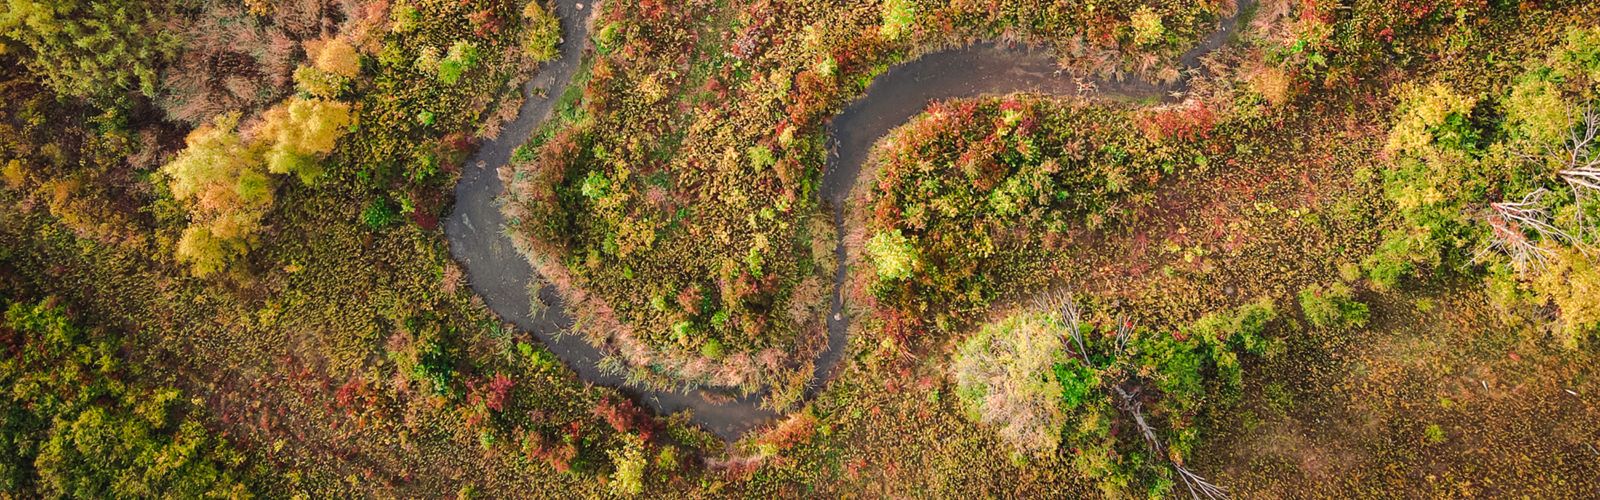 Aerial view of forest and open meadow at Big Darby Creek Headwaters Nature Preserve in the fall.